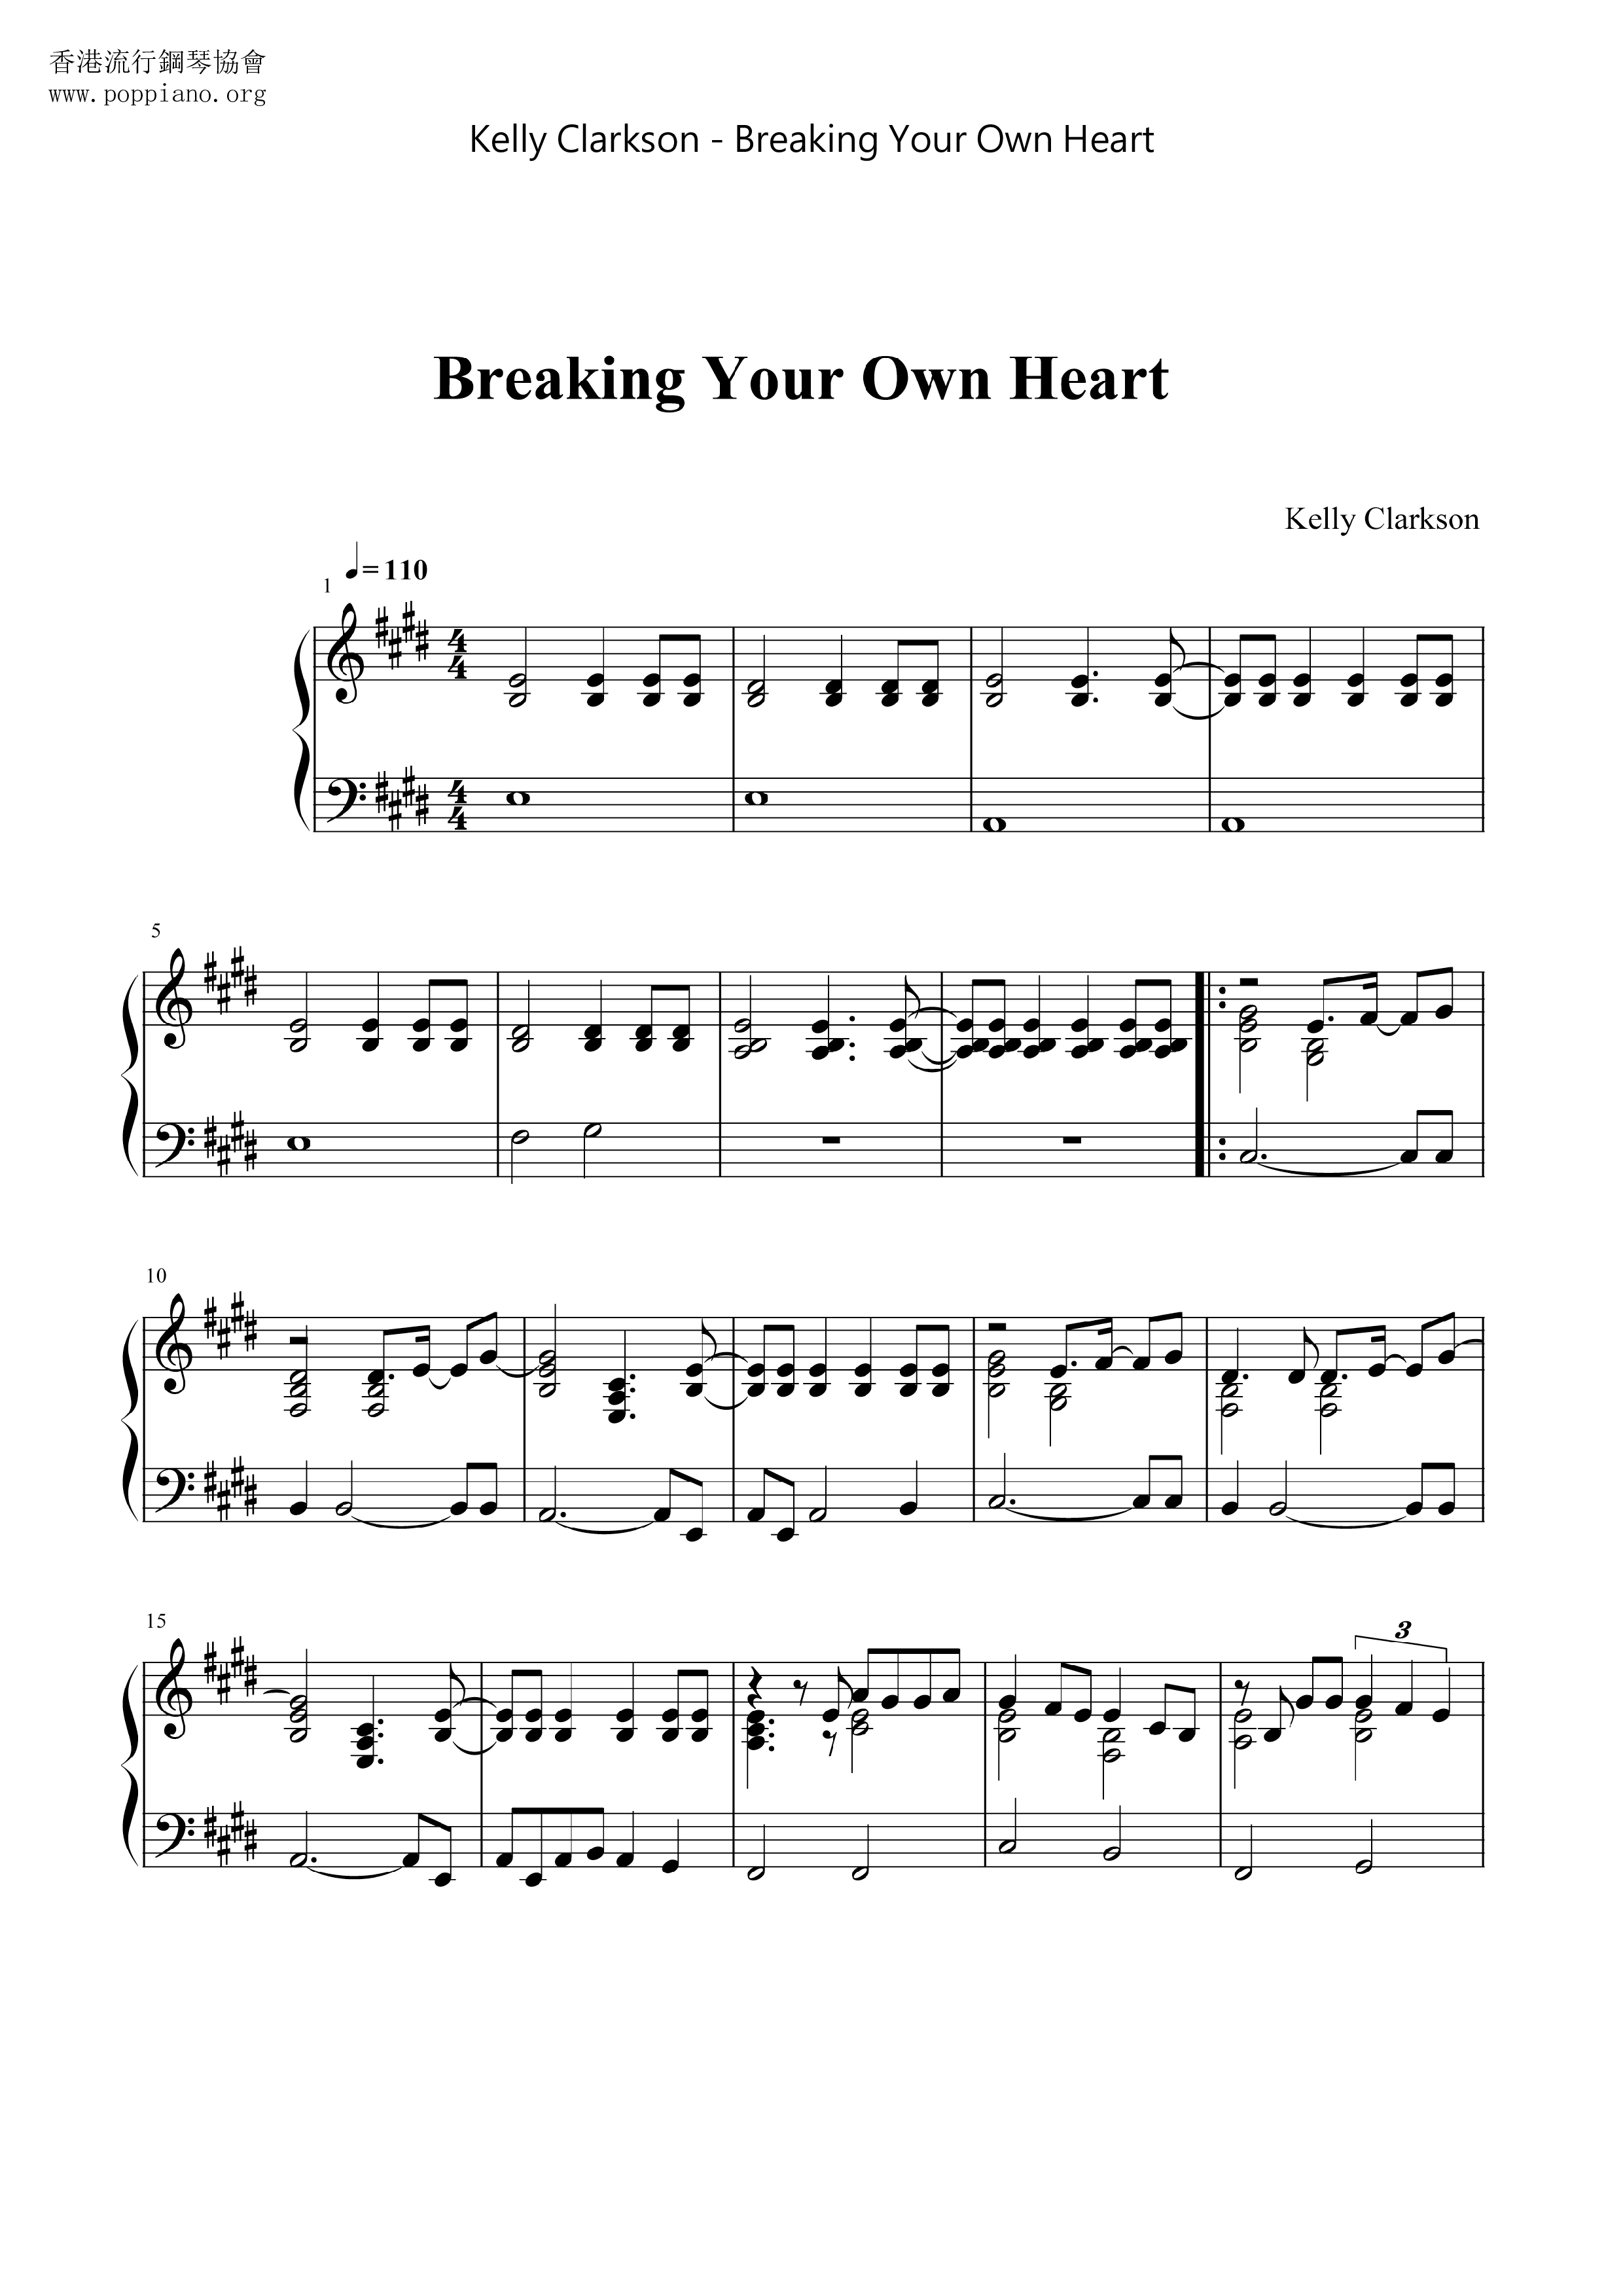 Breaking Your Own Heartピアノ譜